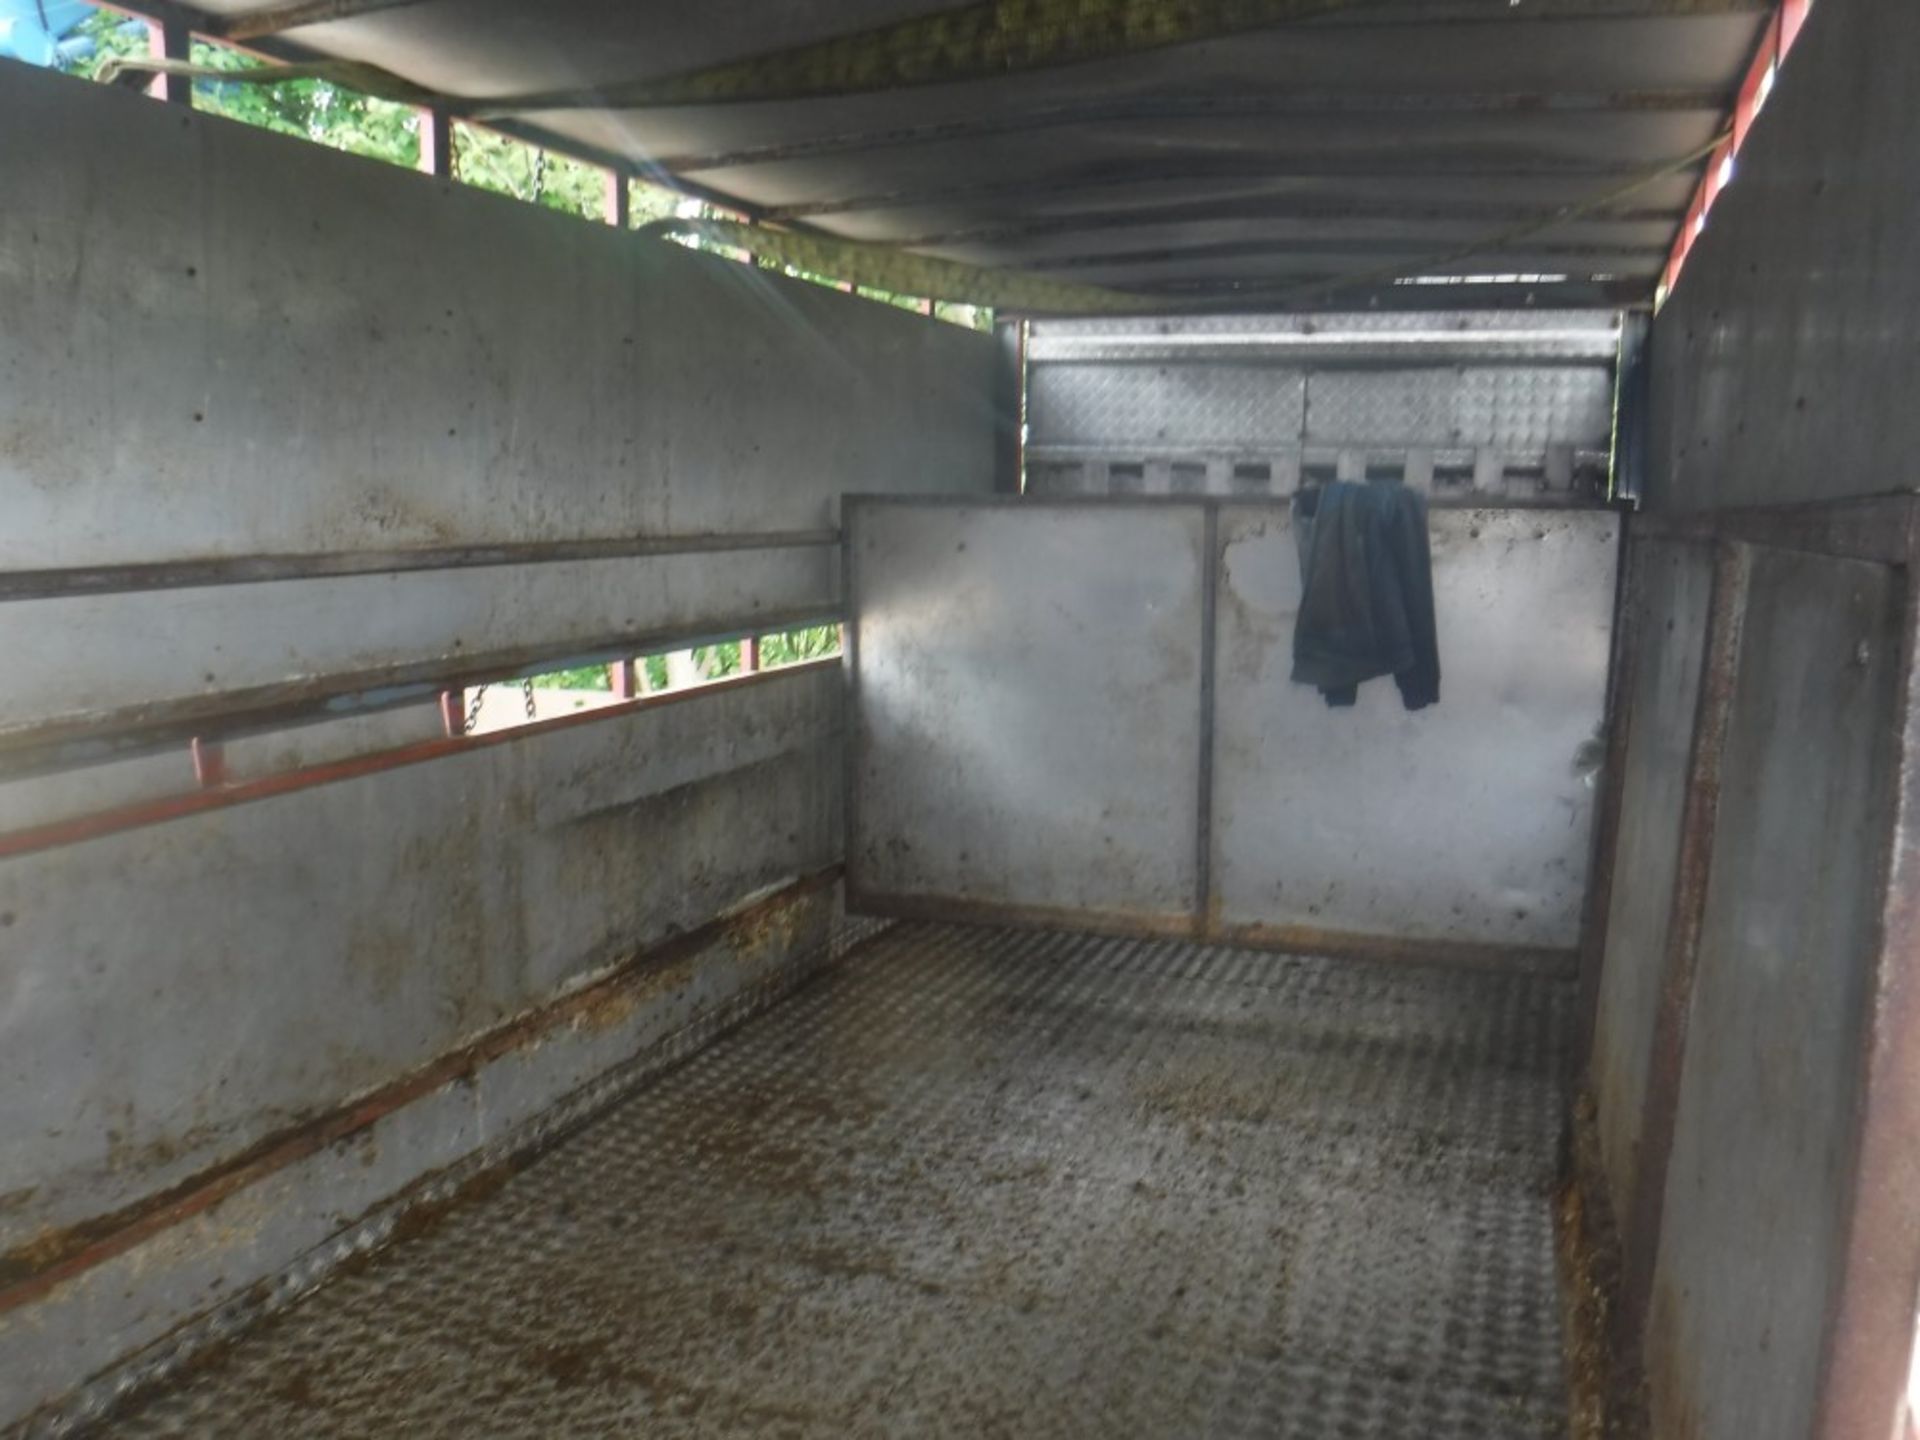 ALLEY HORSE BOX CONTAINER, CHEQUERED PLATE FLOOR, 20' X 7'5" X 6'8", VERY GOOD CONDITION [+ VAT] - Image 5 of 6